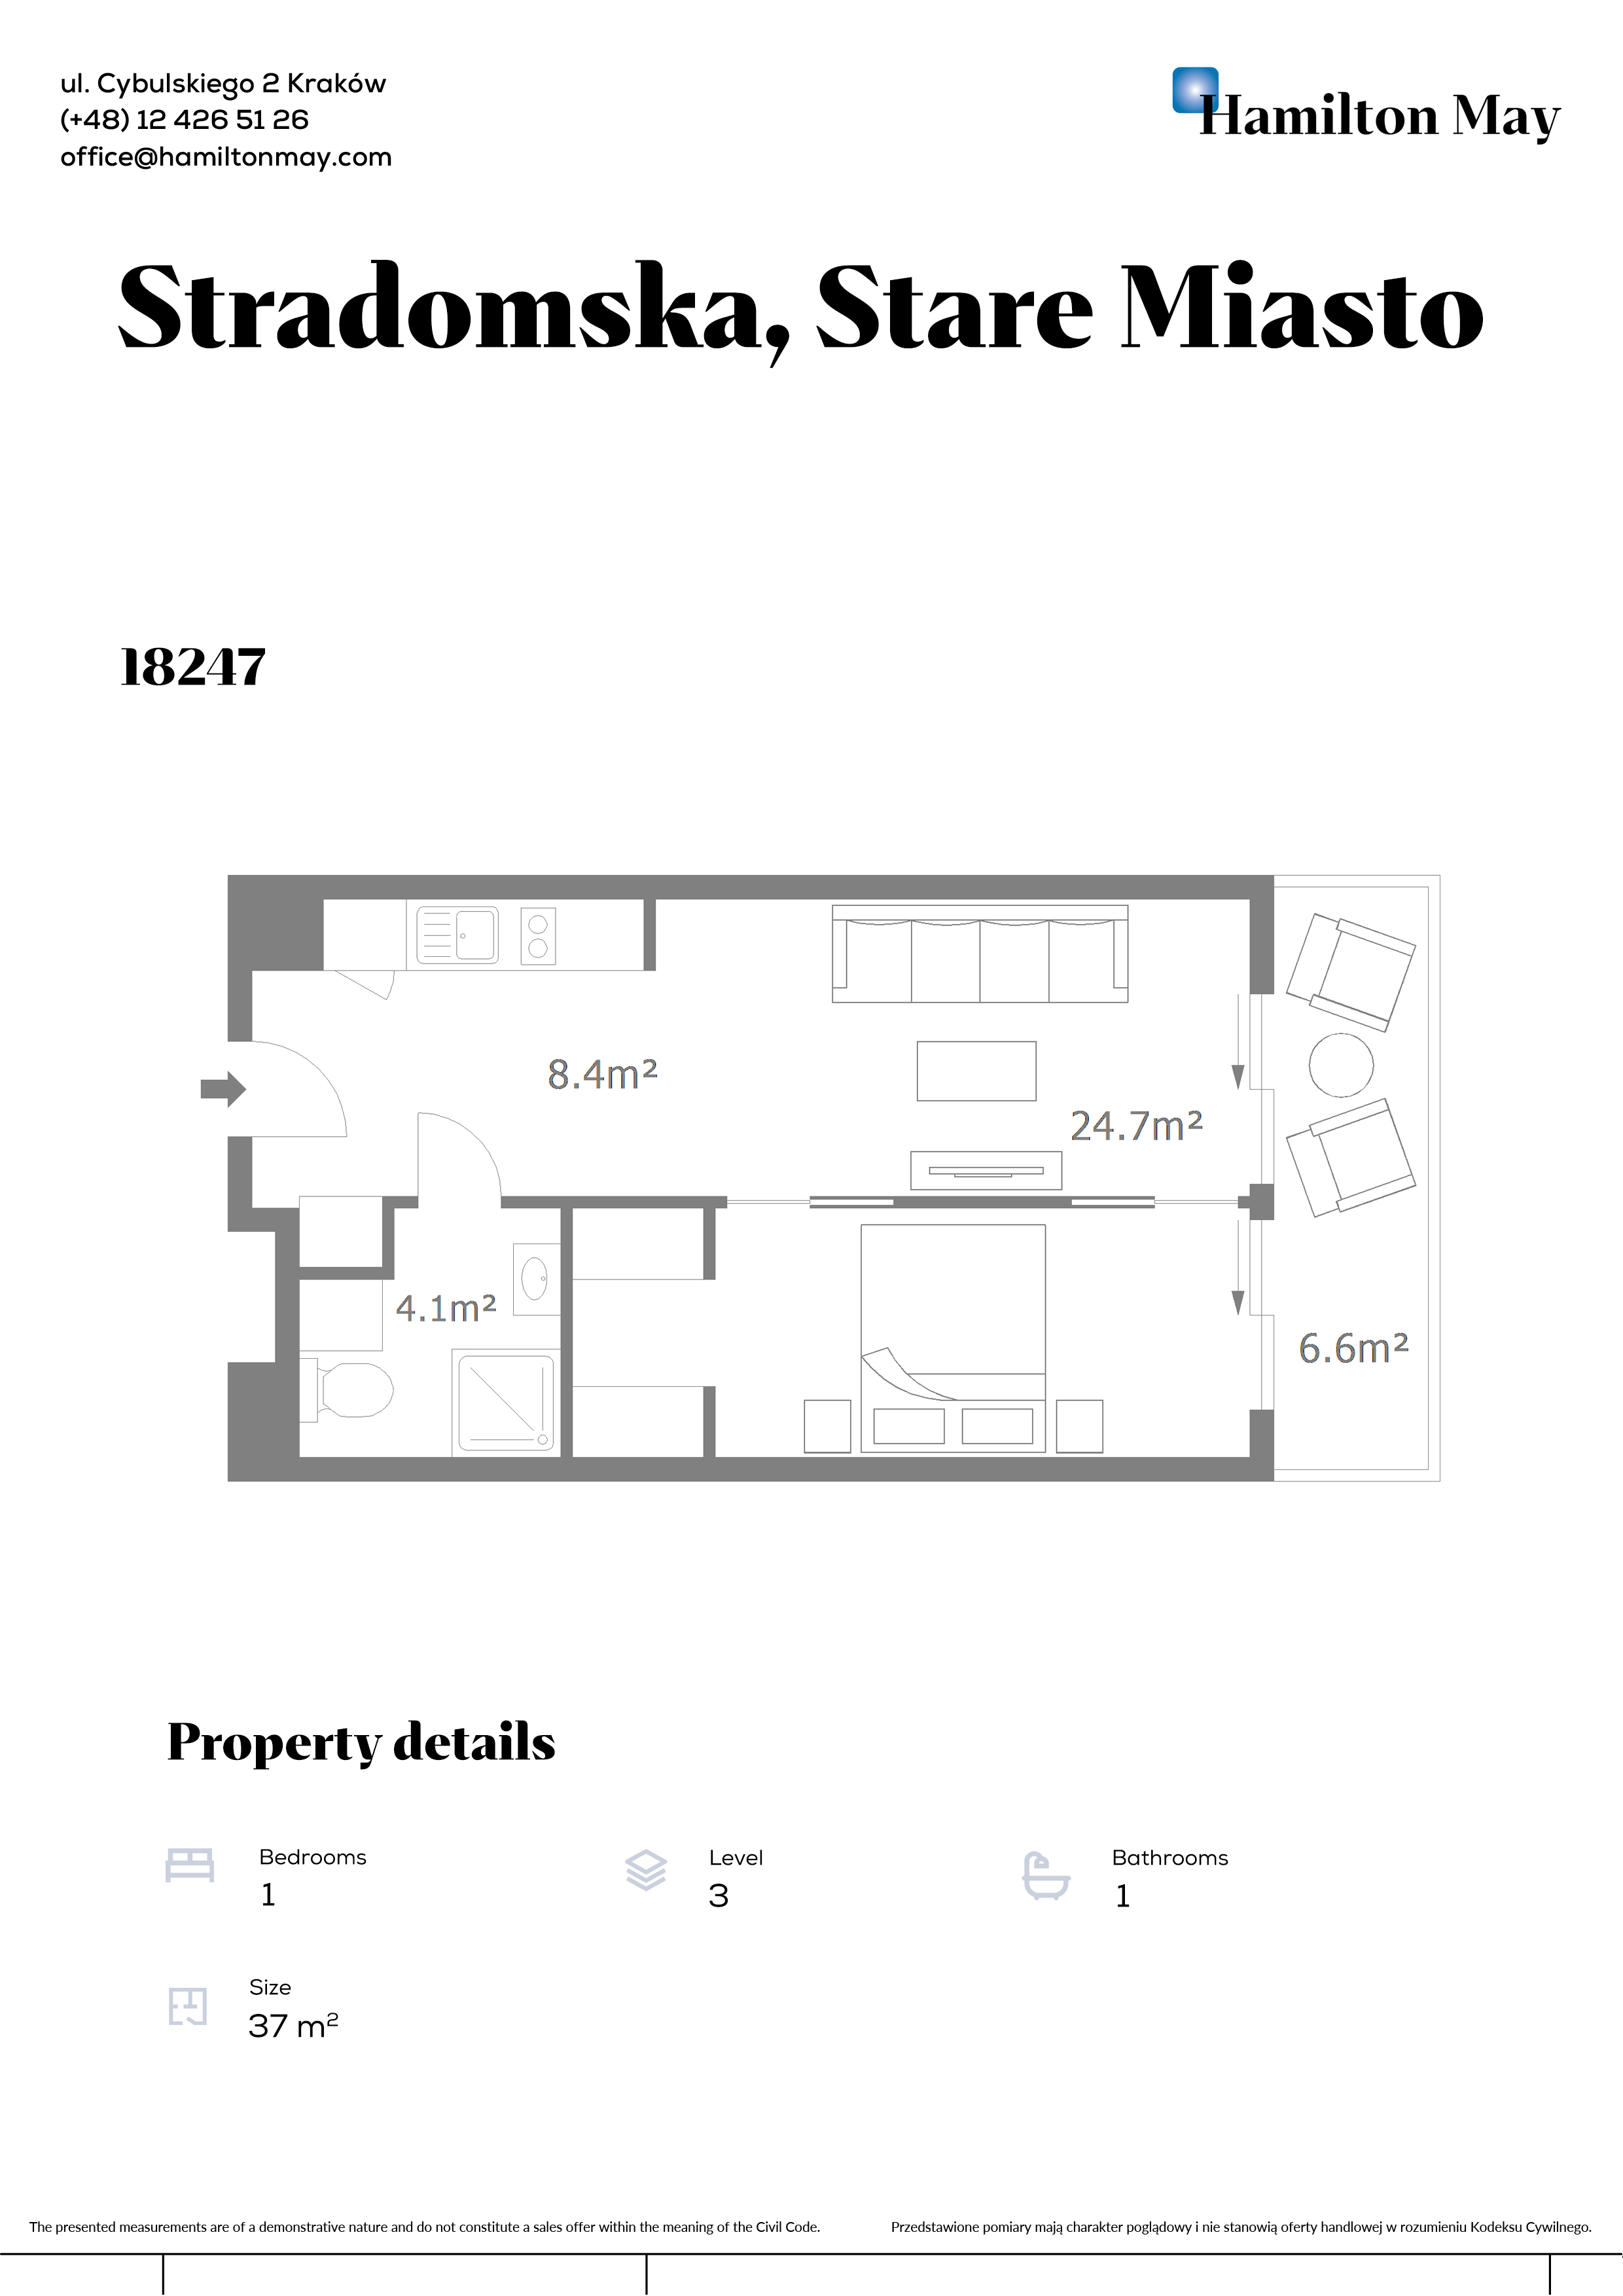 A 1-bedroom, quiet apartment with a balcony in one of the most luxurious investments in Krakow - plan